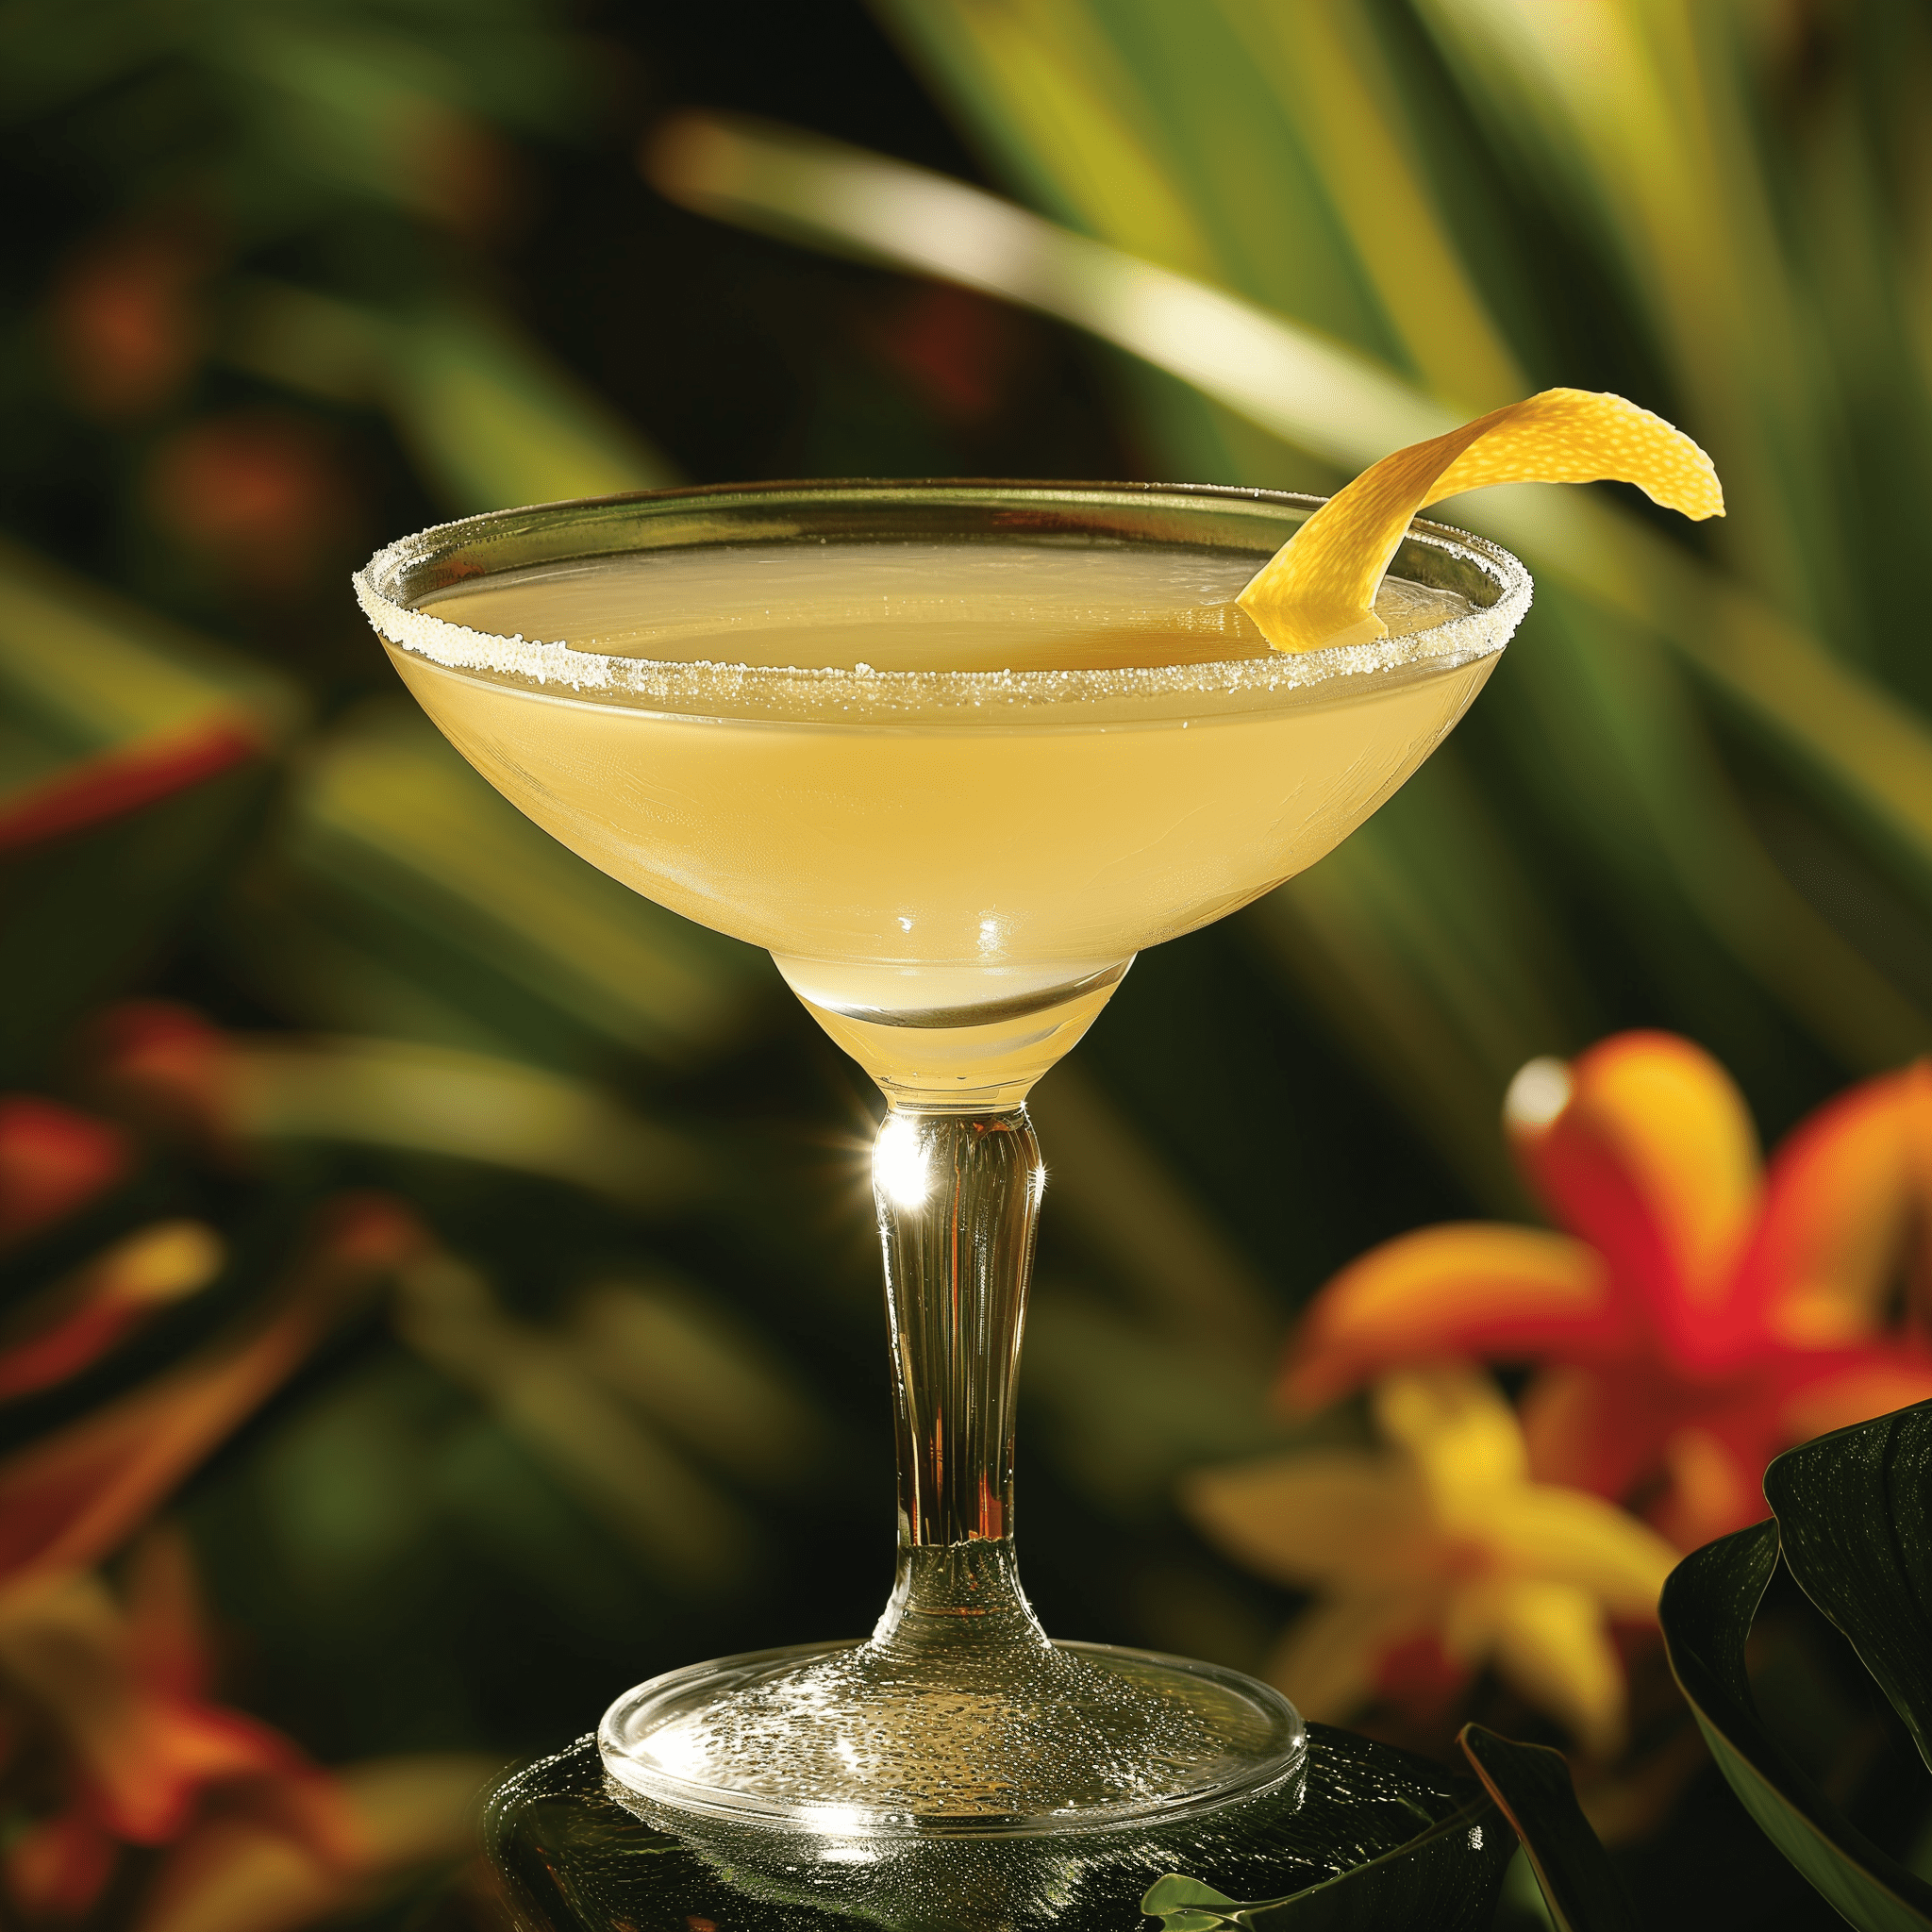 The Caribbean Zest is a delightful blend of sweet and sour, with the Cointreau providing a smooth orange backdrop to the zesty lemon juice. The Mount Gay Silver rum adds a clean, slightly spicy kick that is both invigorating and satisfying.